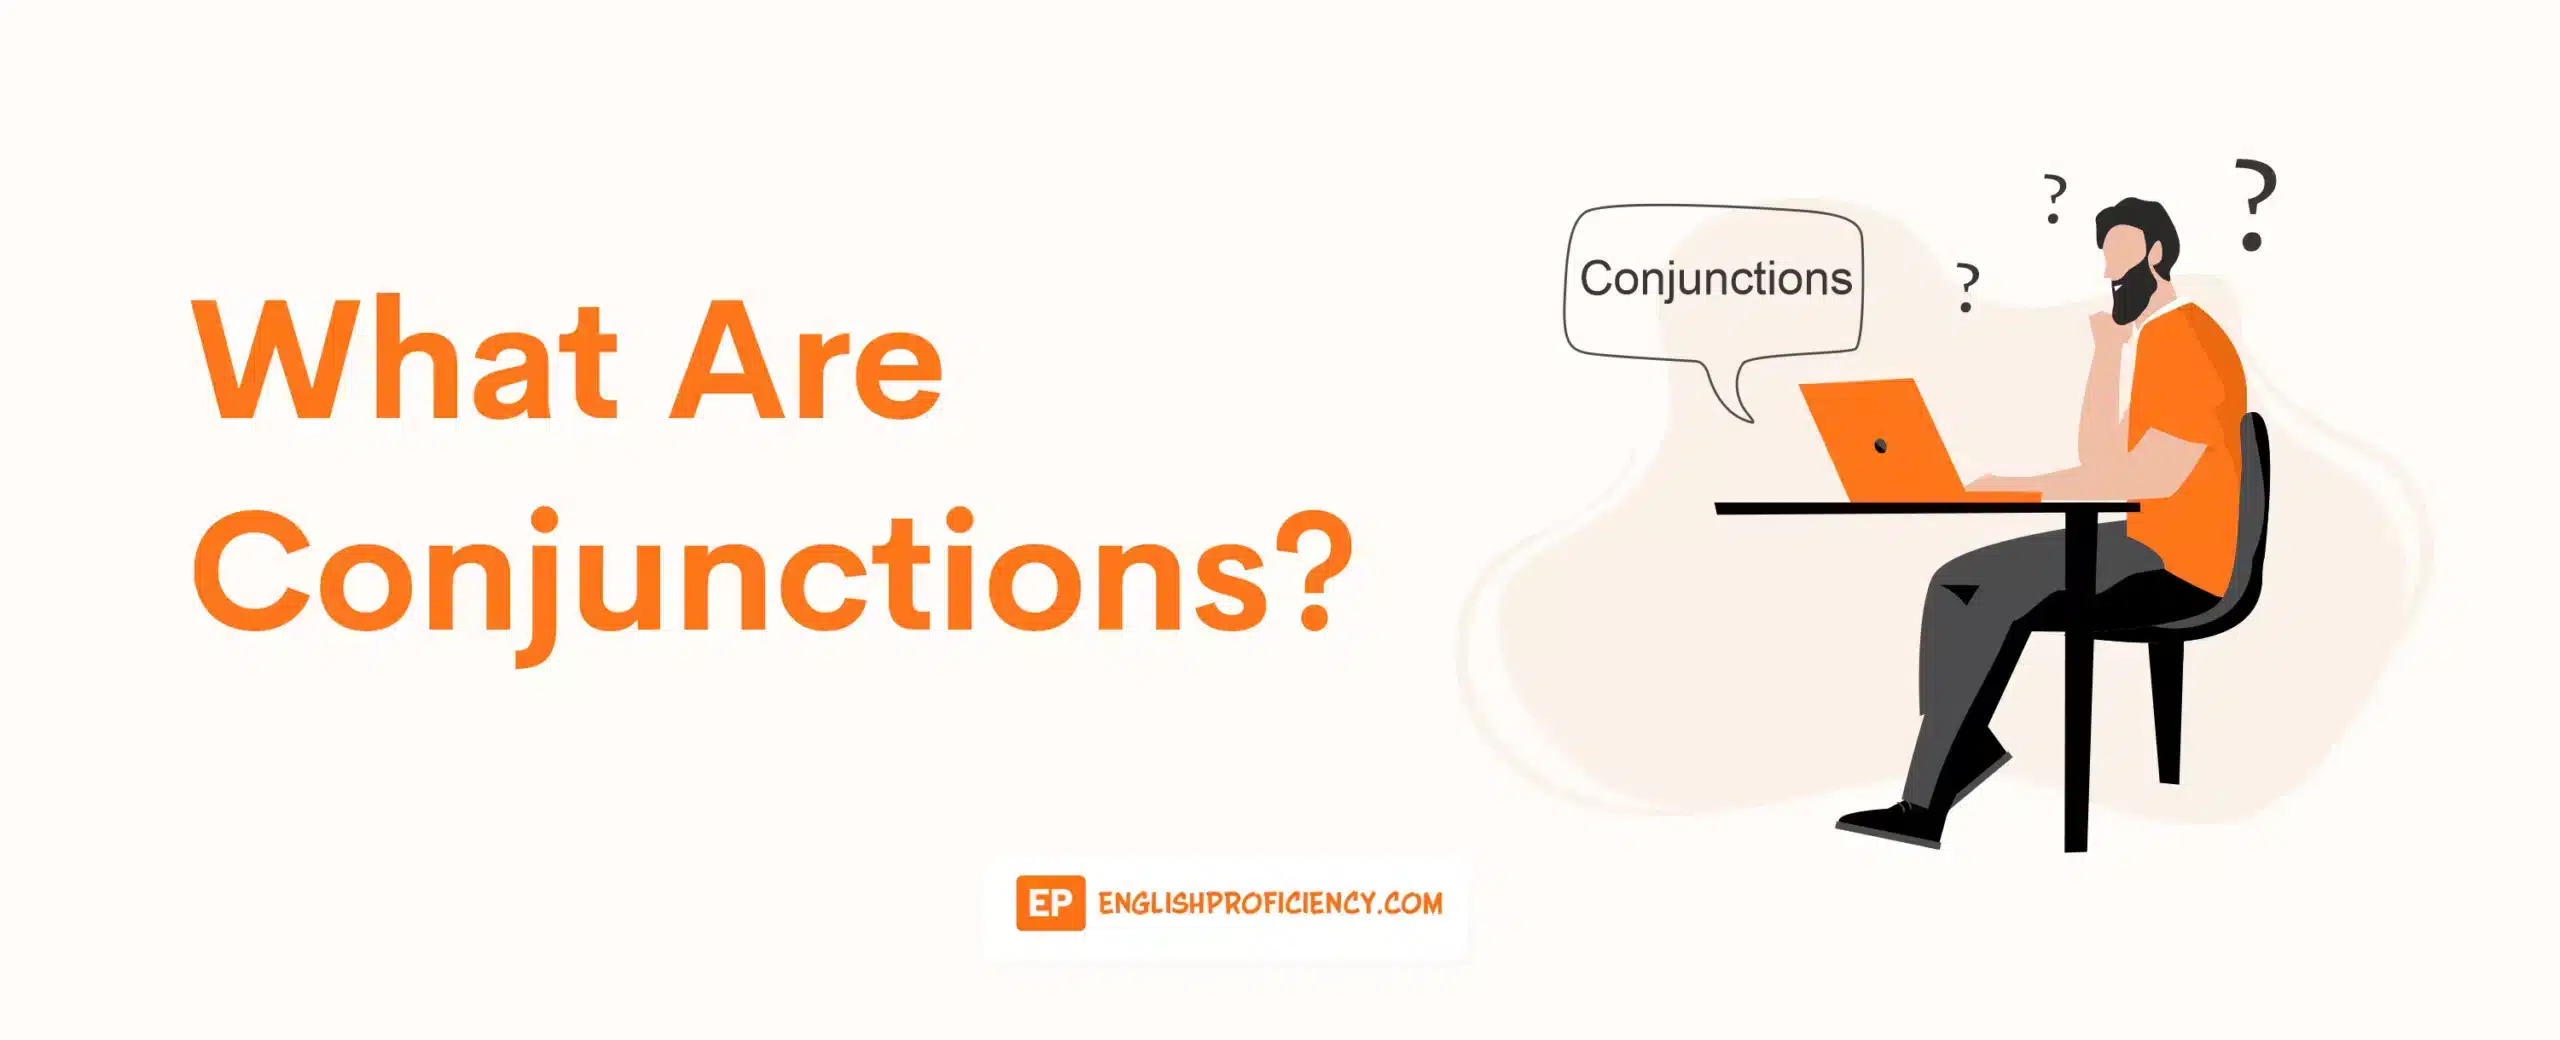 What Are Conjunctions